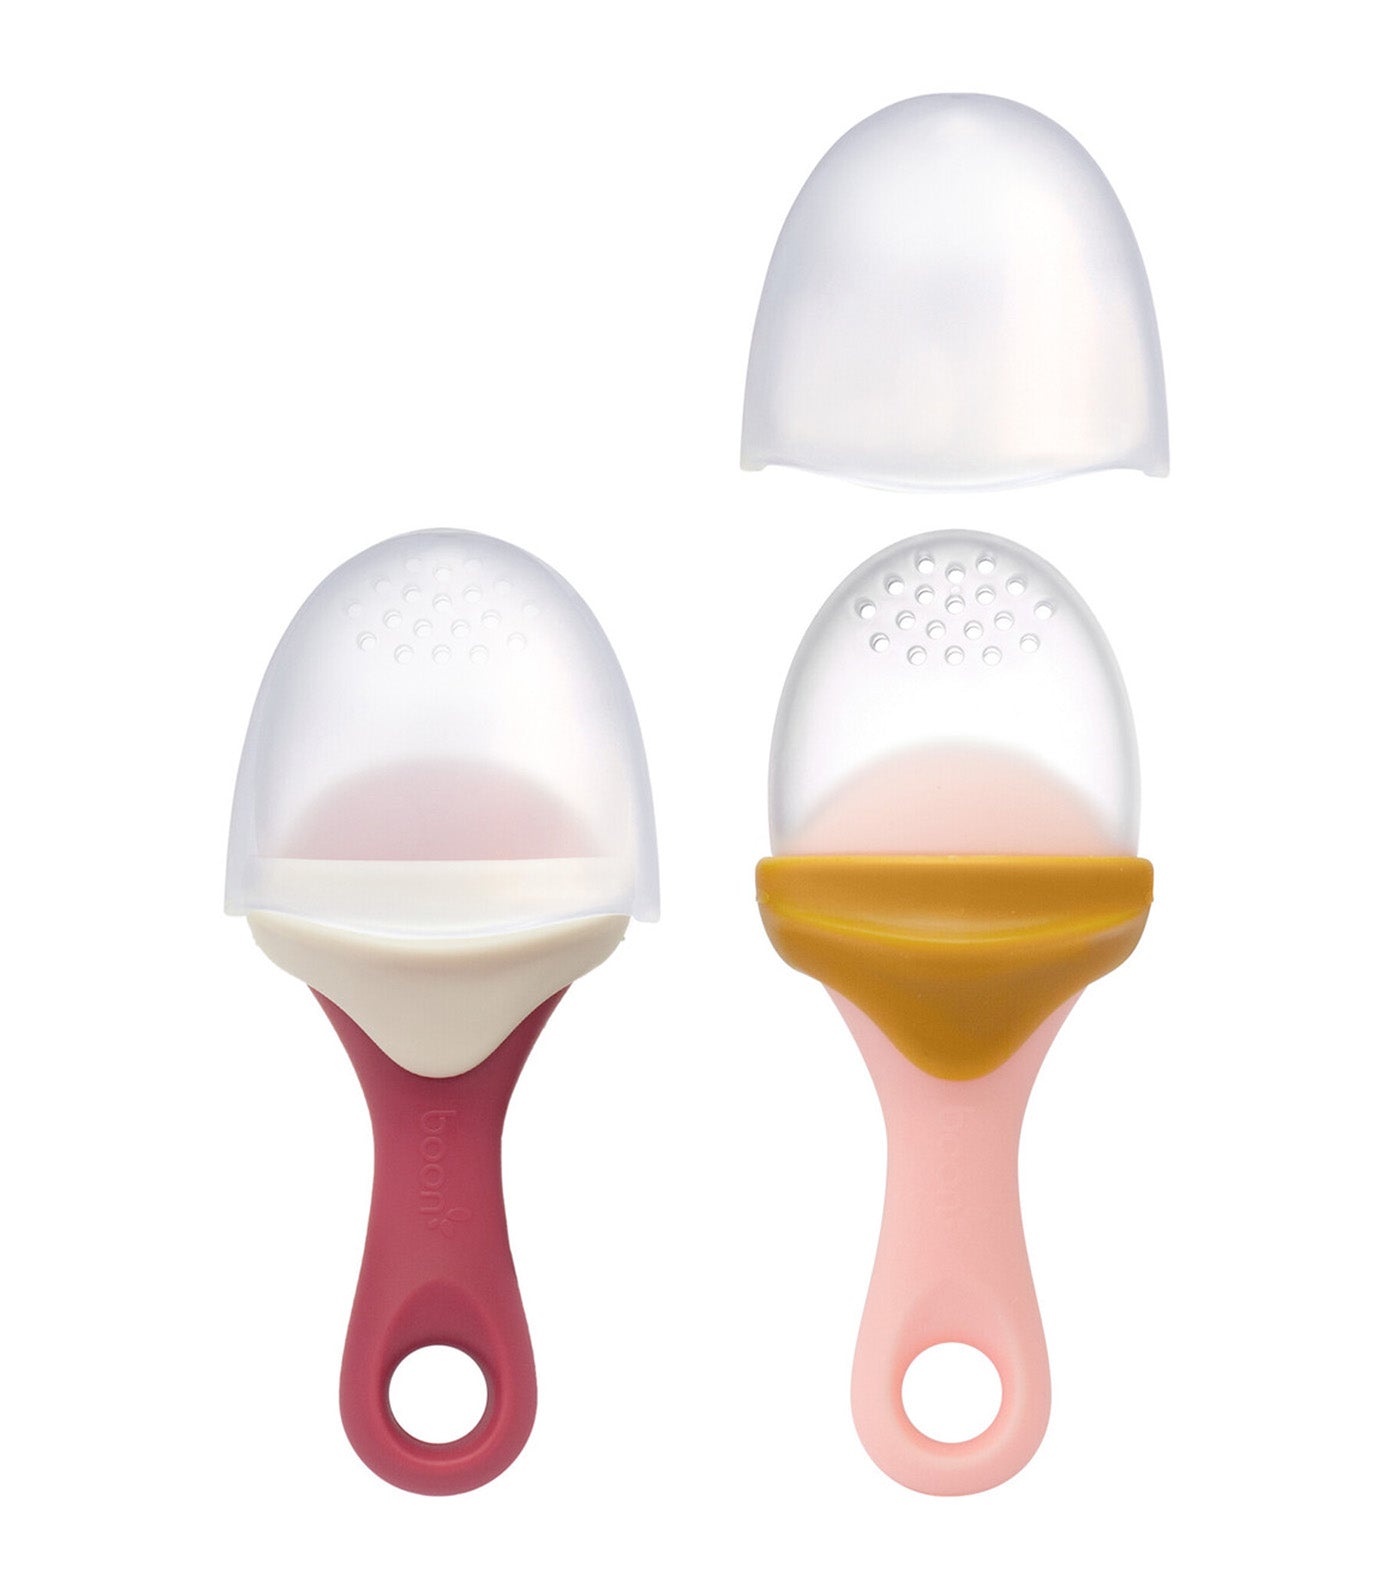 Pulp Silicone Feeder 2 Pack Orange/Pink and White/Mauve